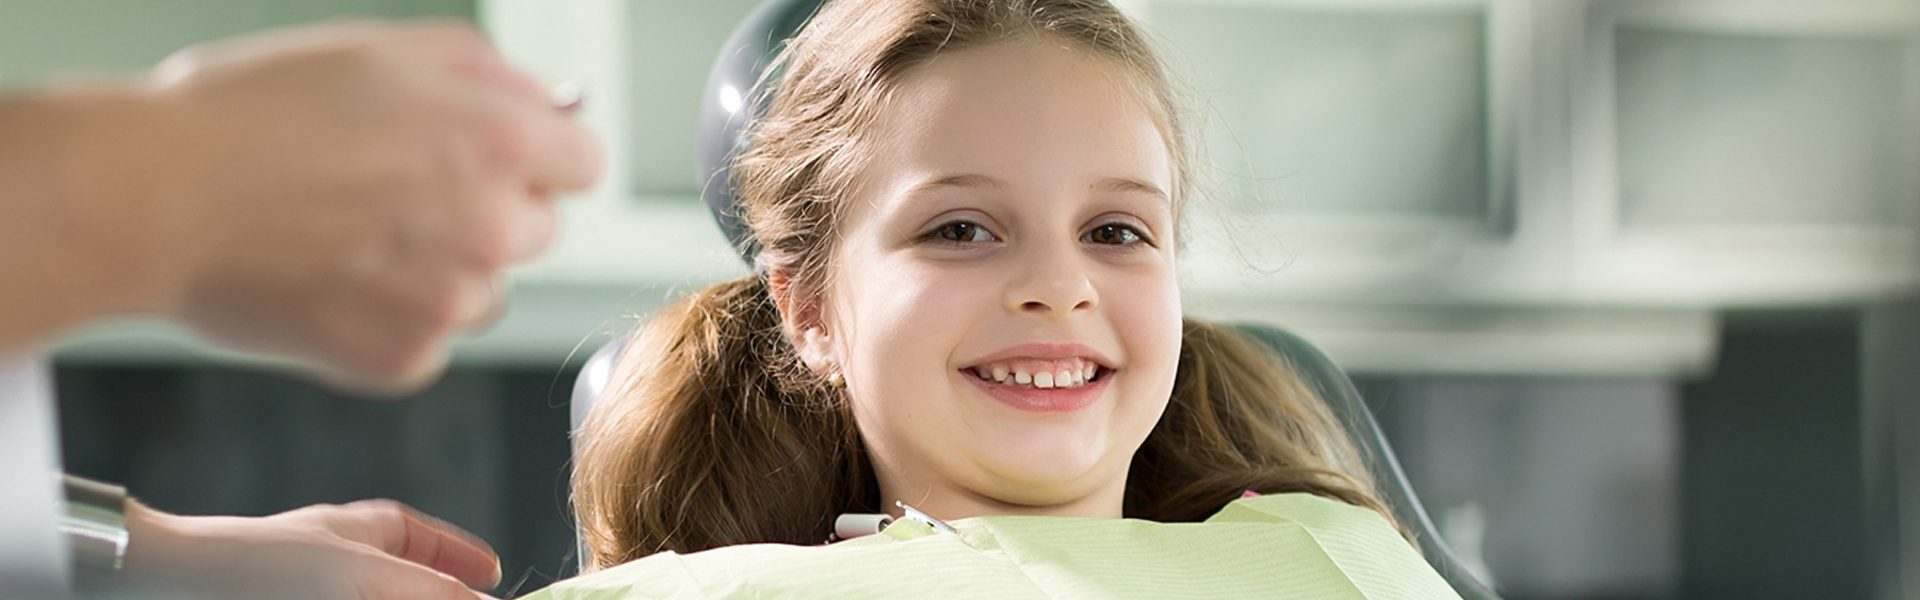 Let Your Child Benefit from Children’s Dentistry Program in Colombia, SC